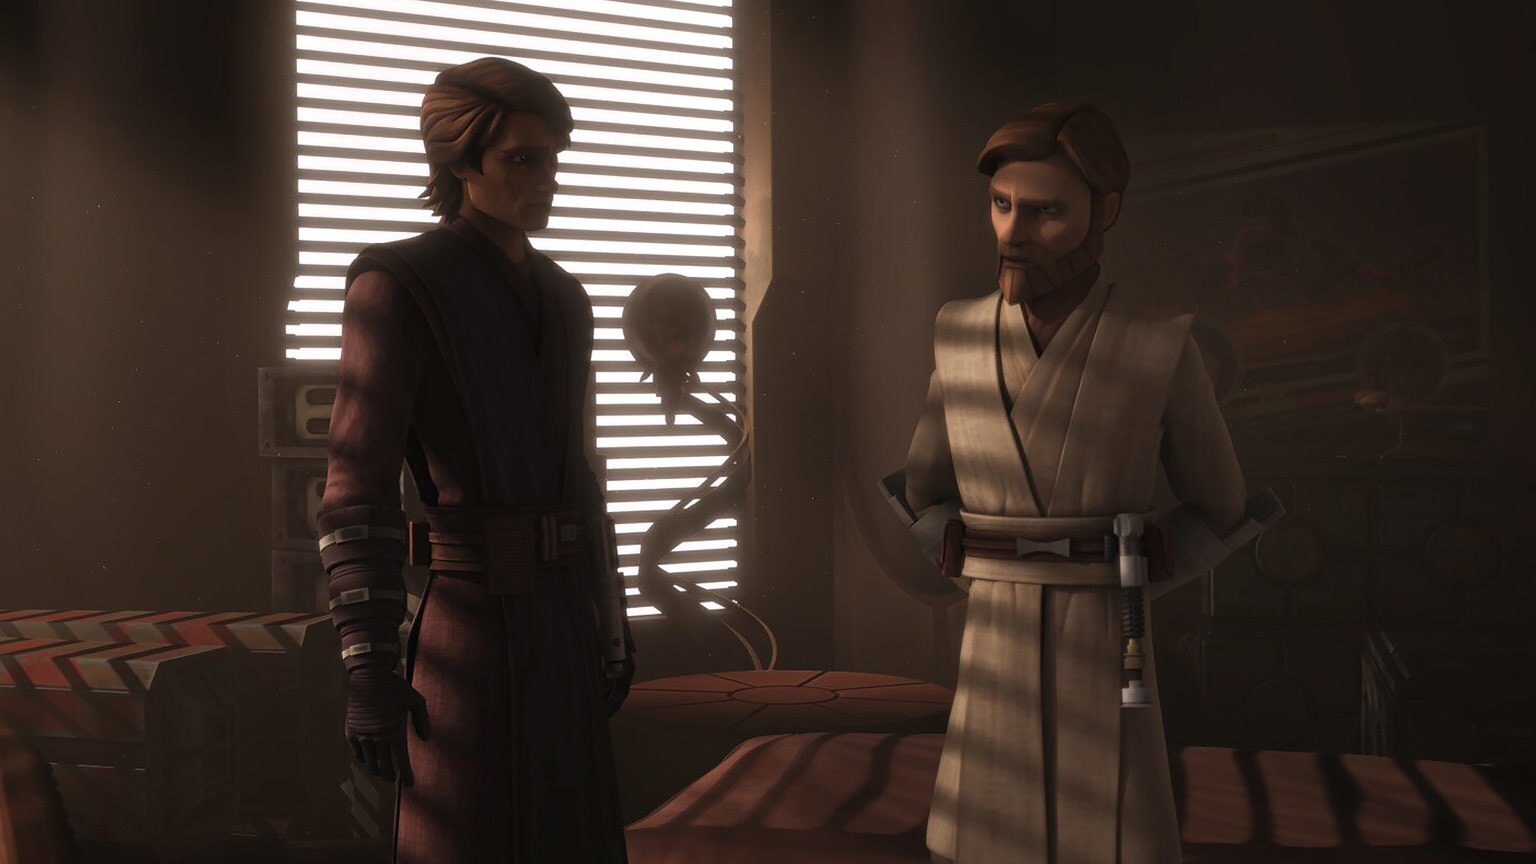 The Clone Wars Rewatch: Anakin's Rage and "The Rise of Clovis"